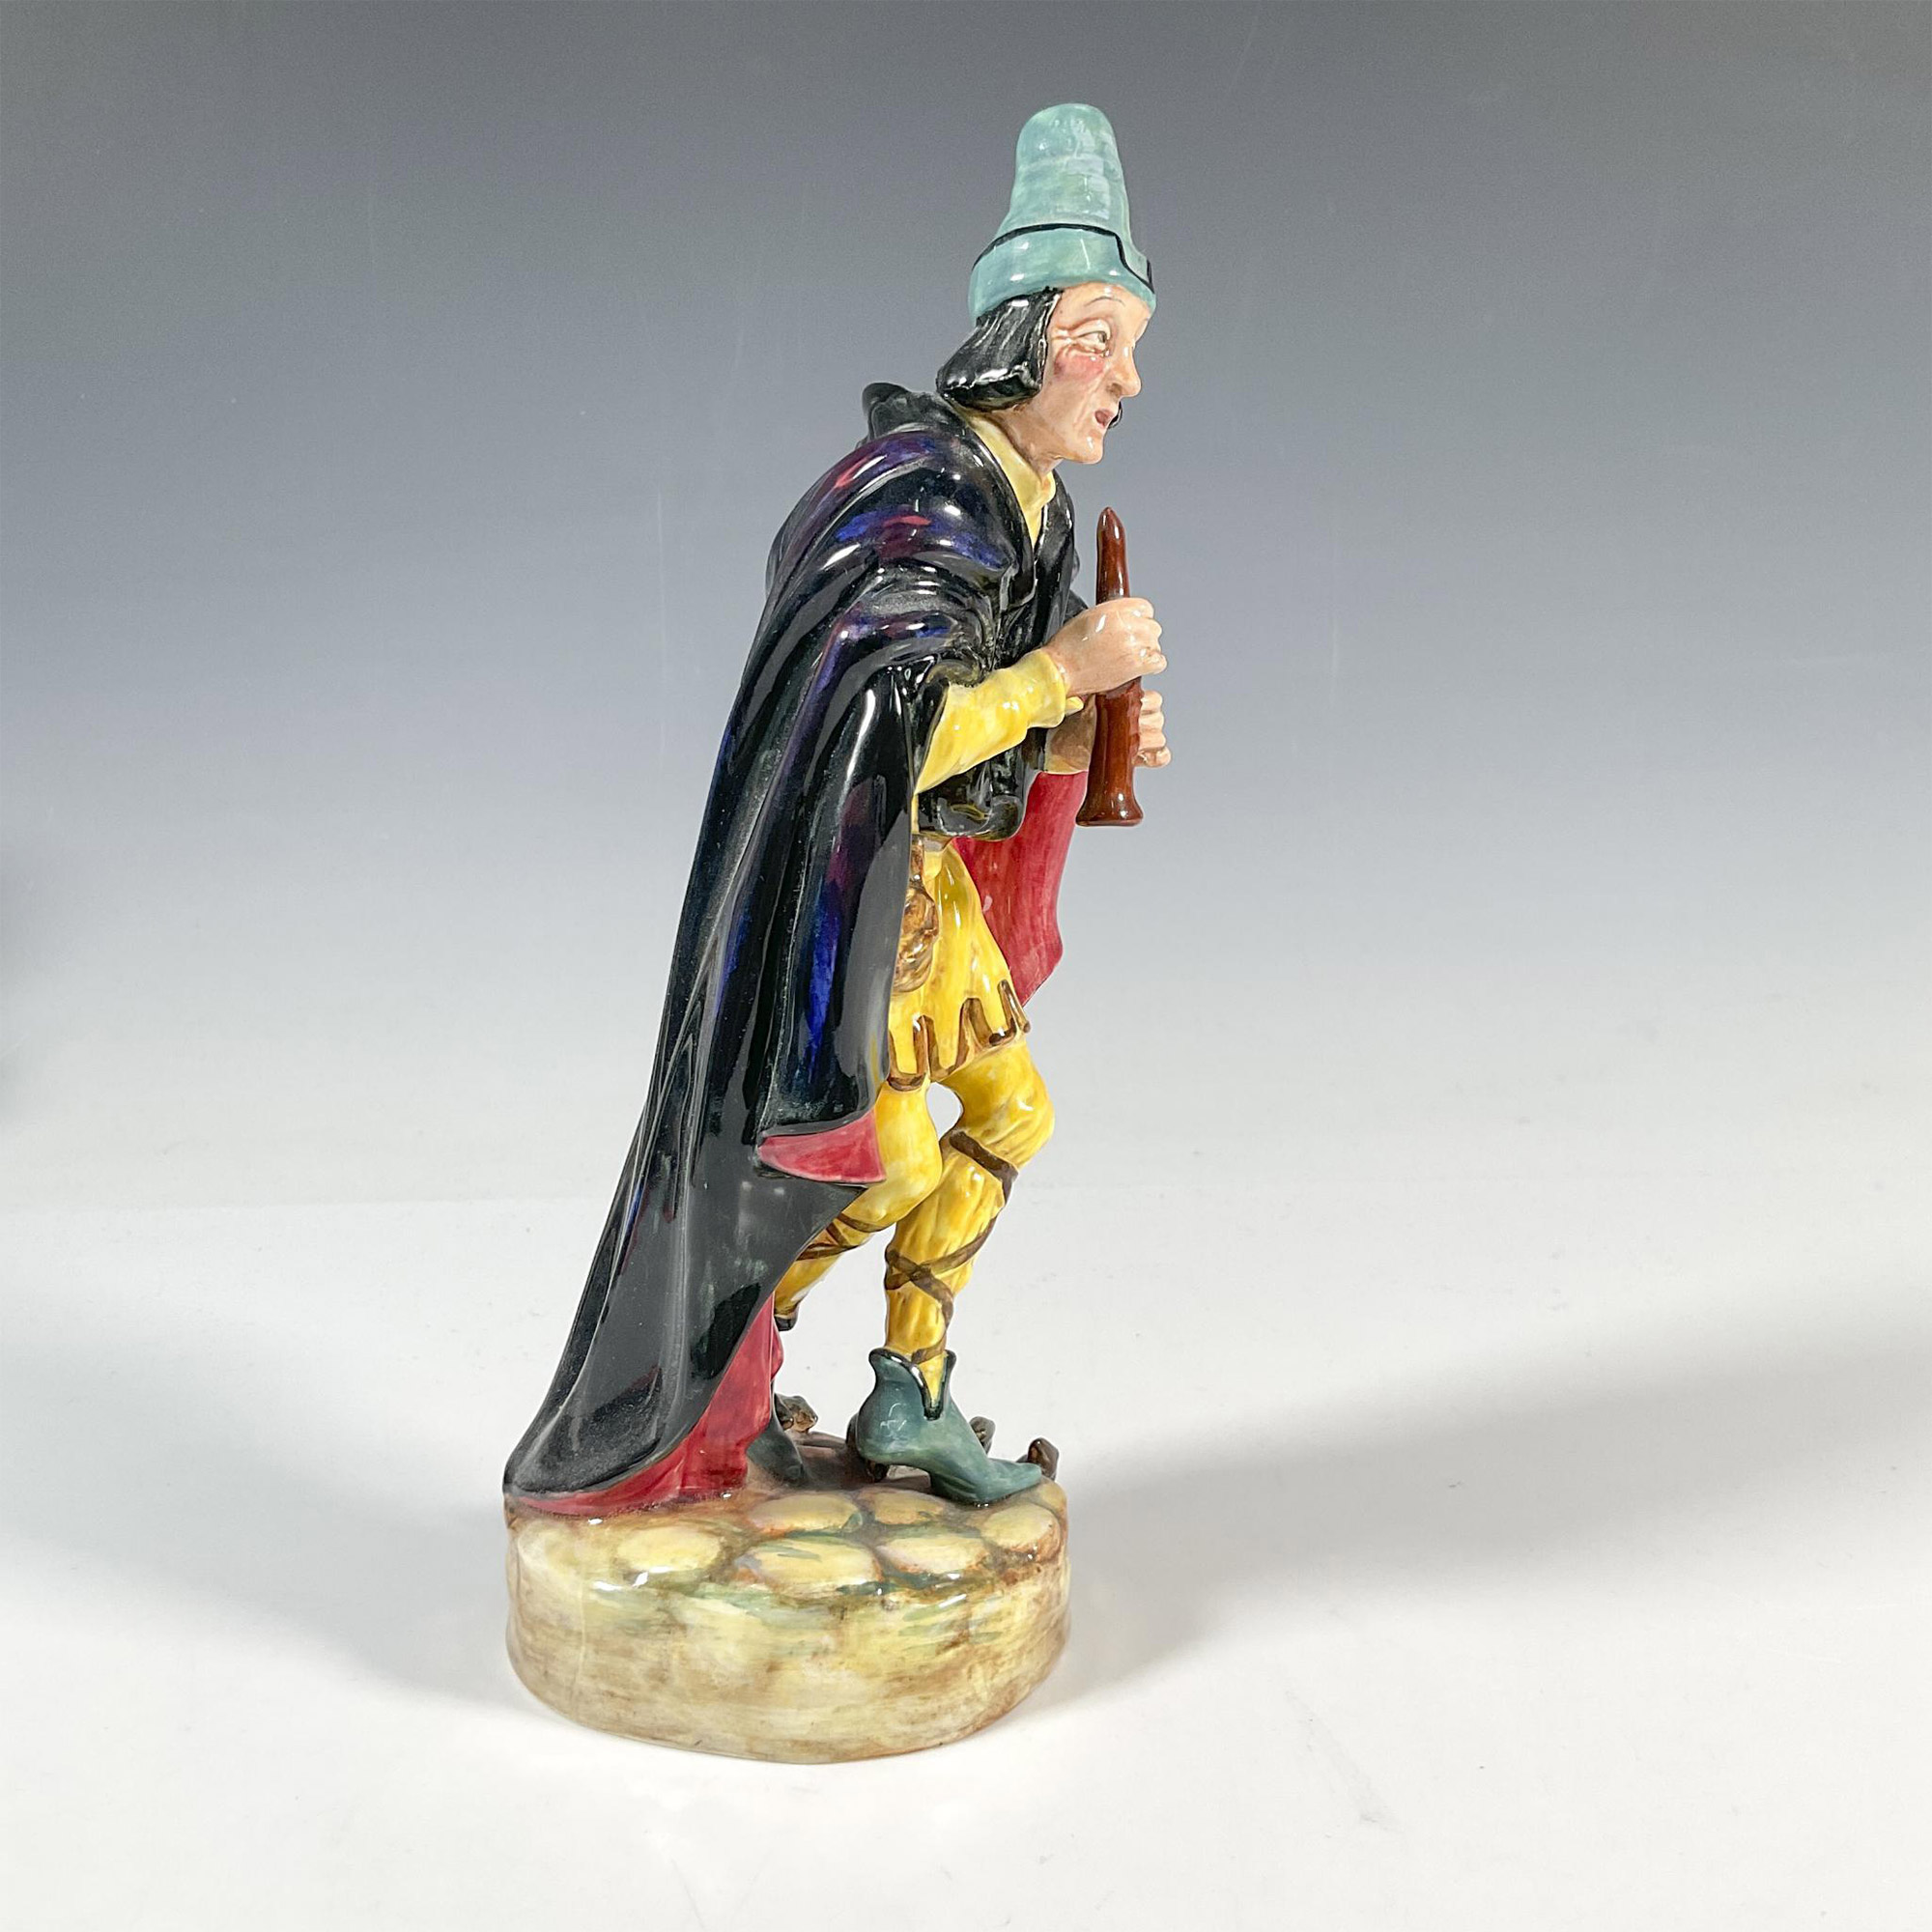 Pied Piper HN2102 - Royal Doulton Figurine - Image 4 of 5